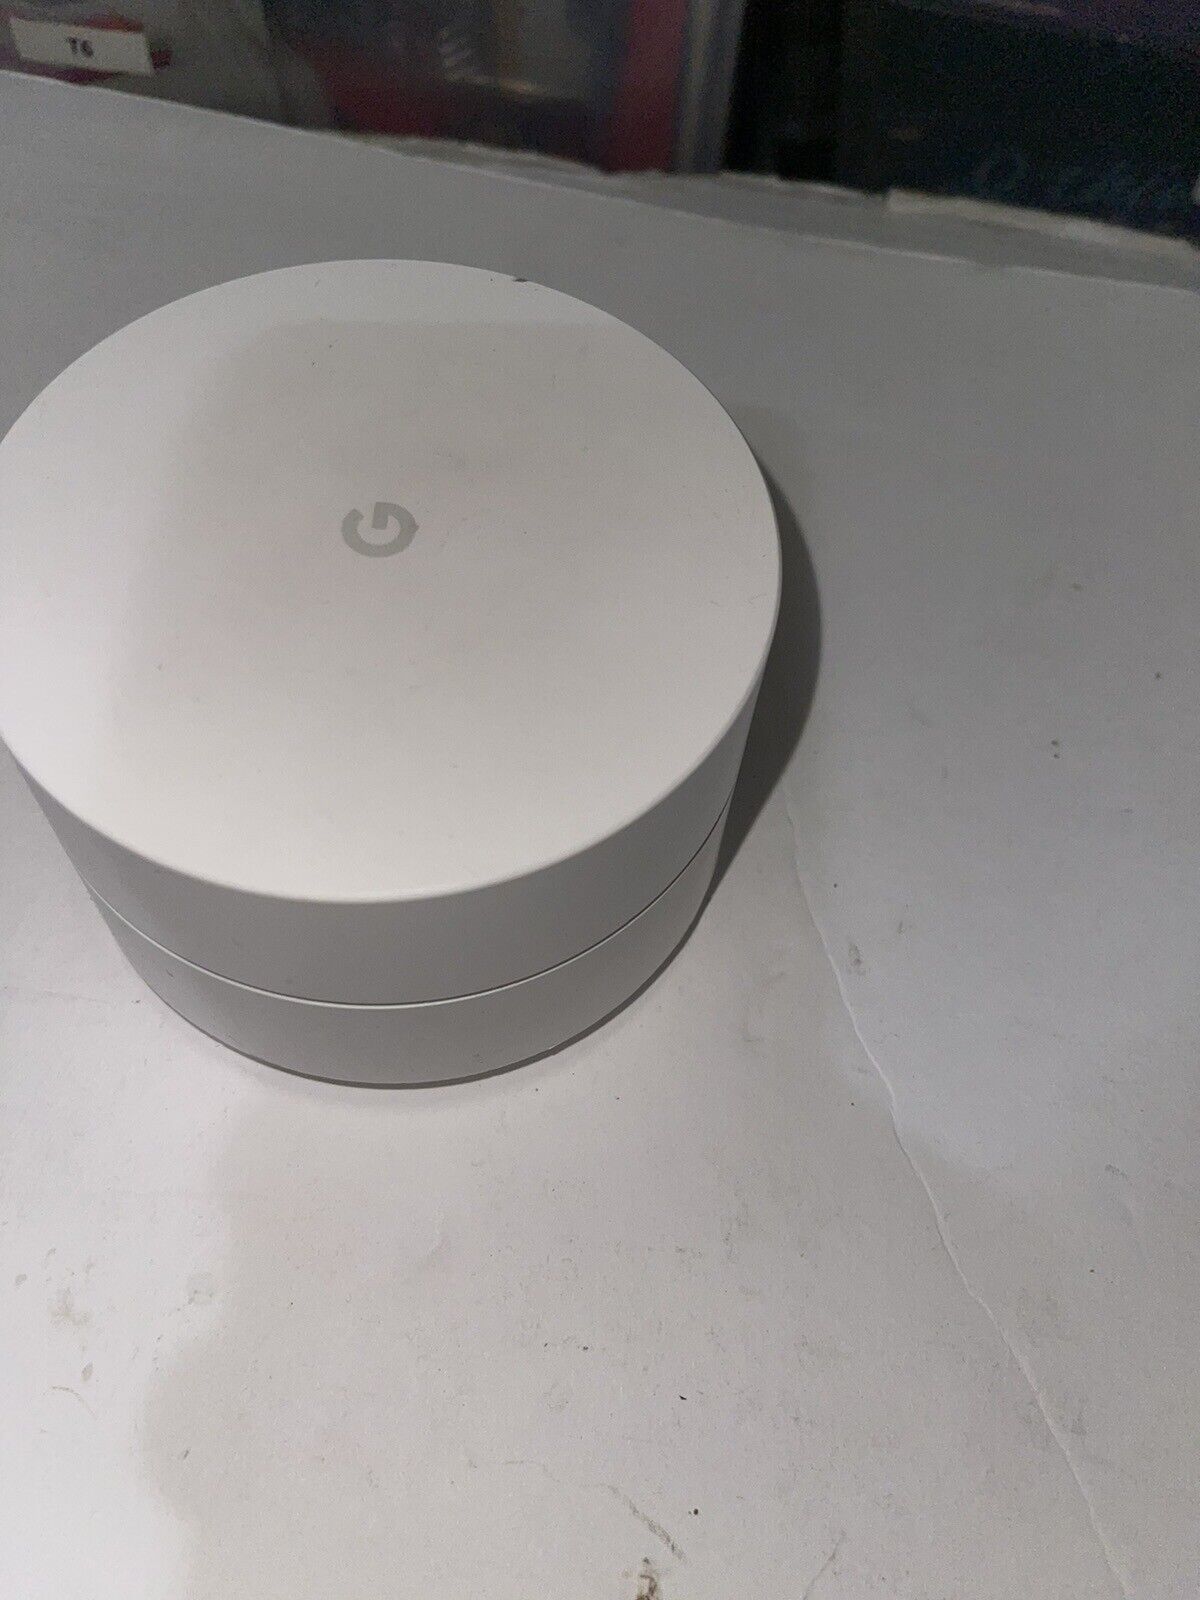 Google AC-1304 - 1200Mbps Wireless Mesh Router - No Power Cord